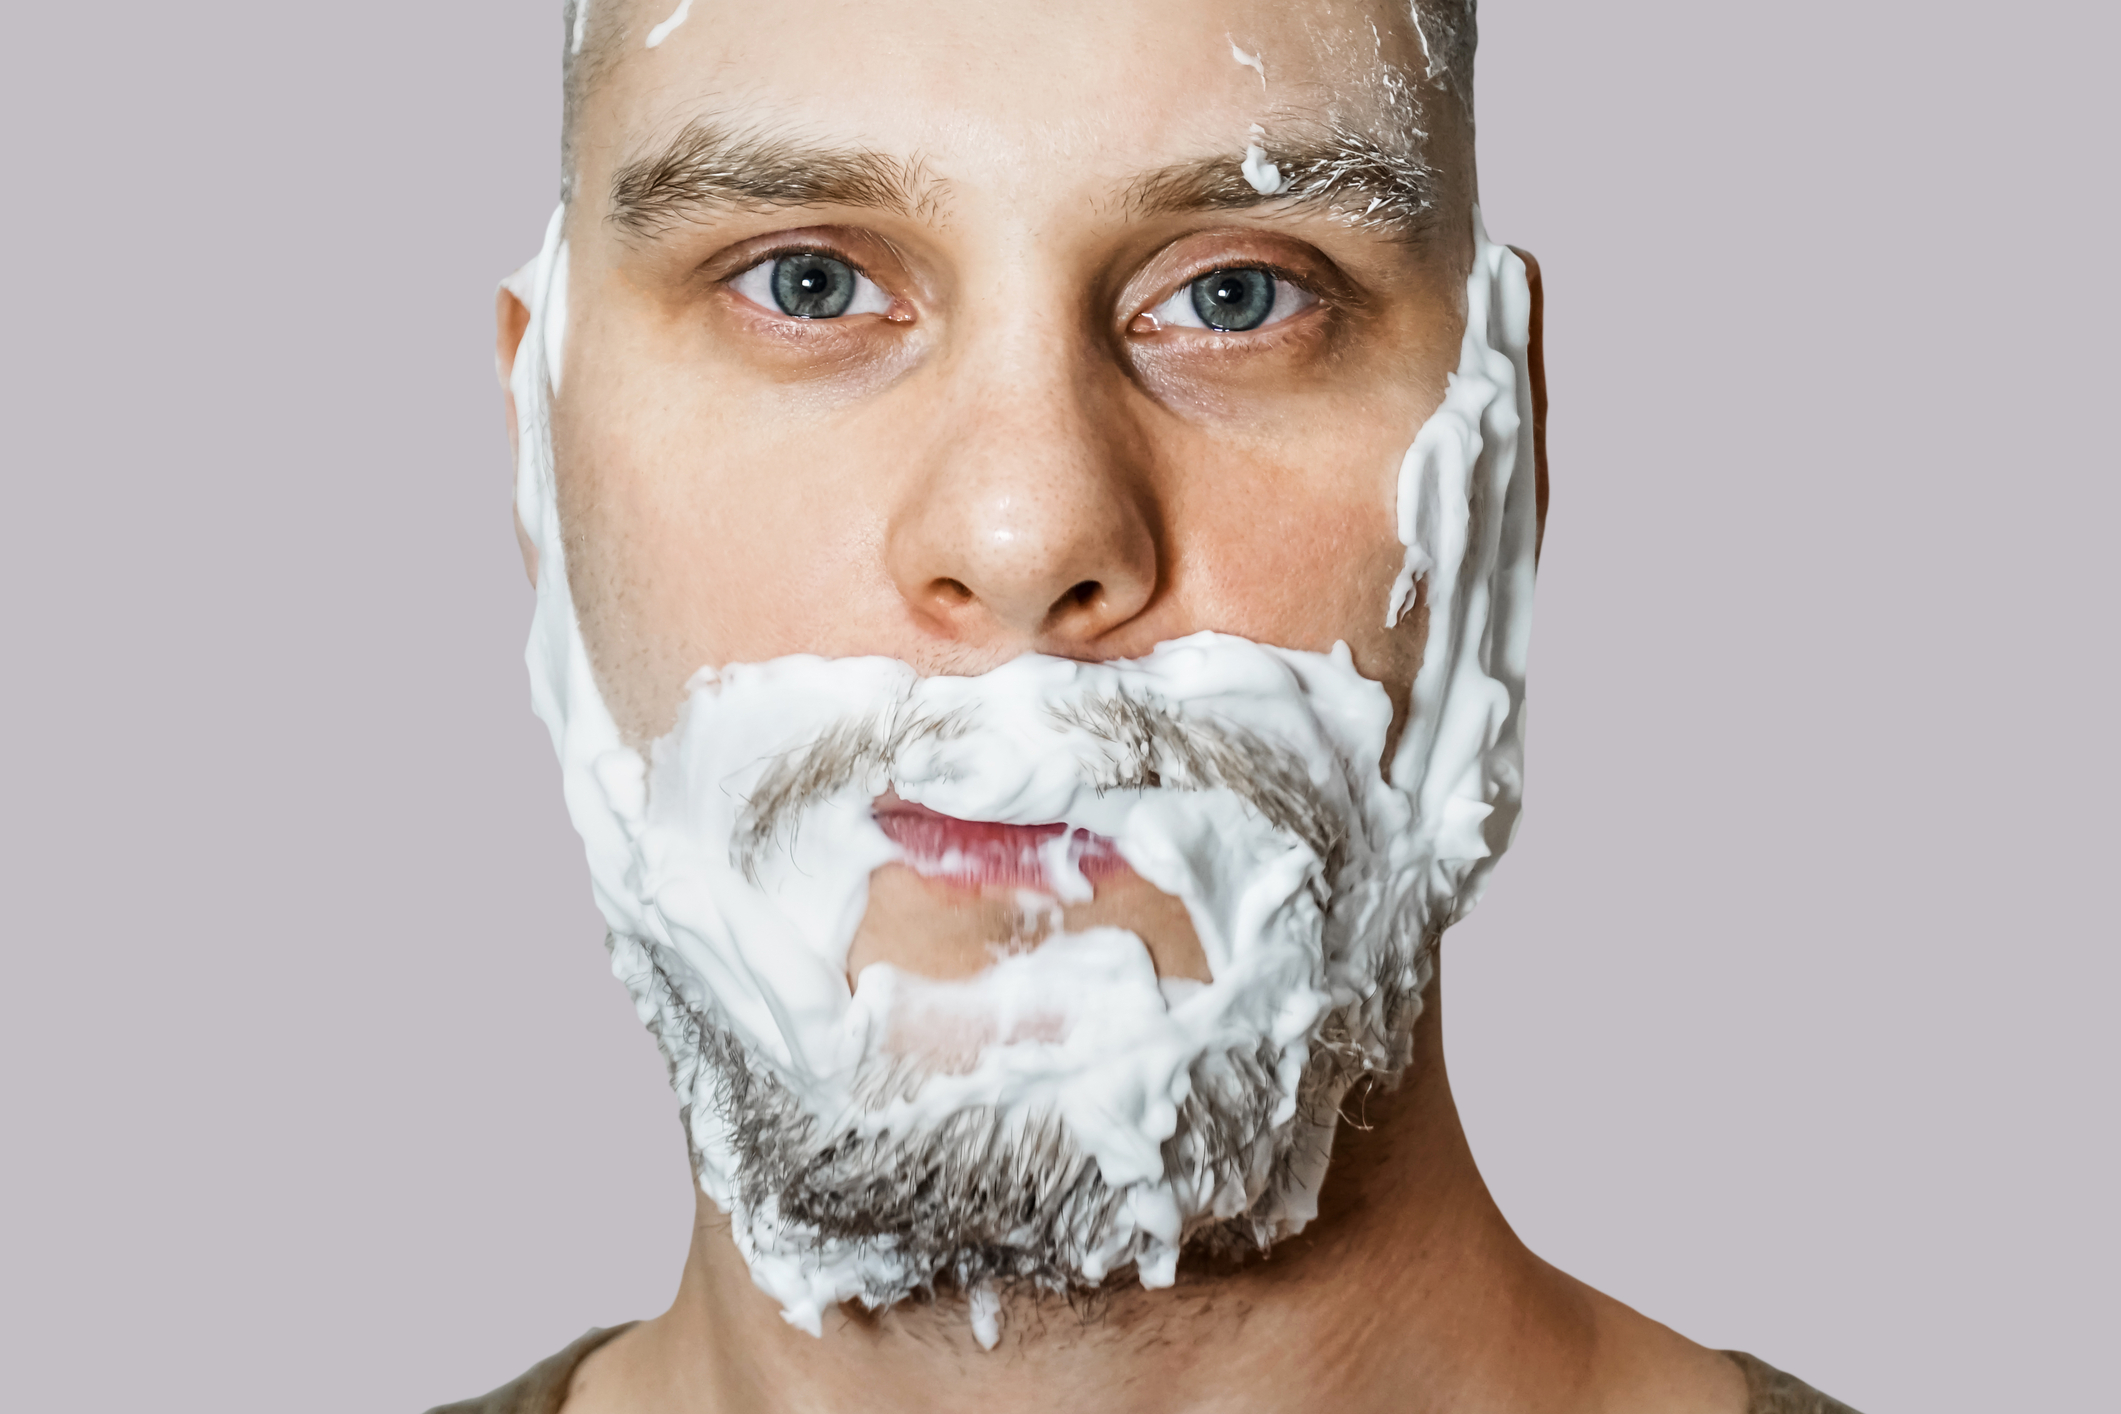 Man with beard covered in shaving cream